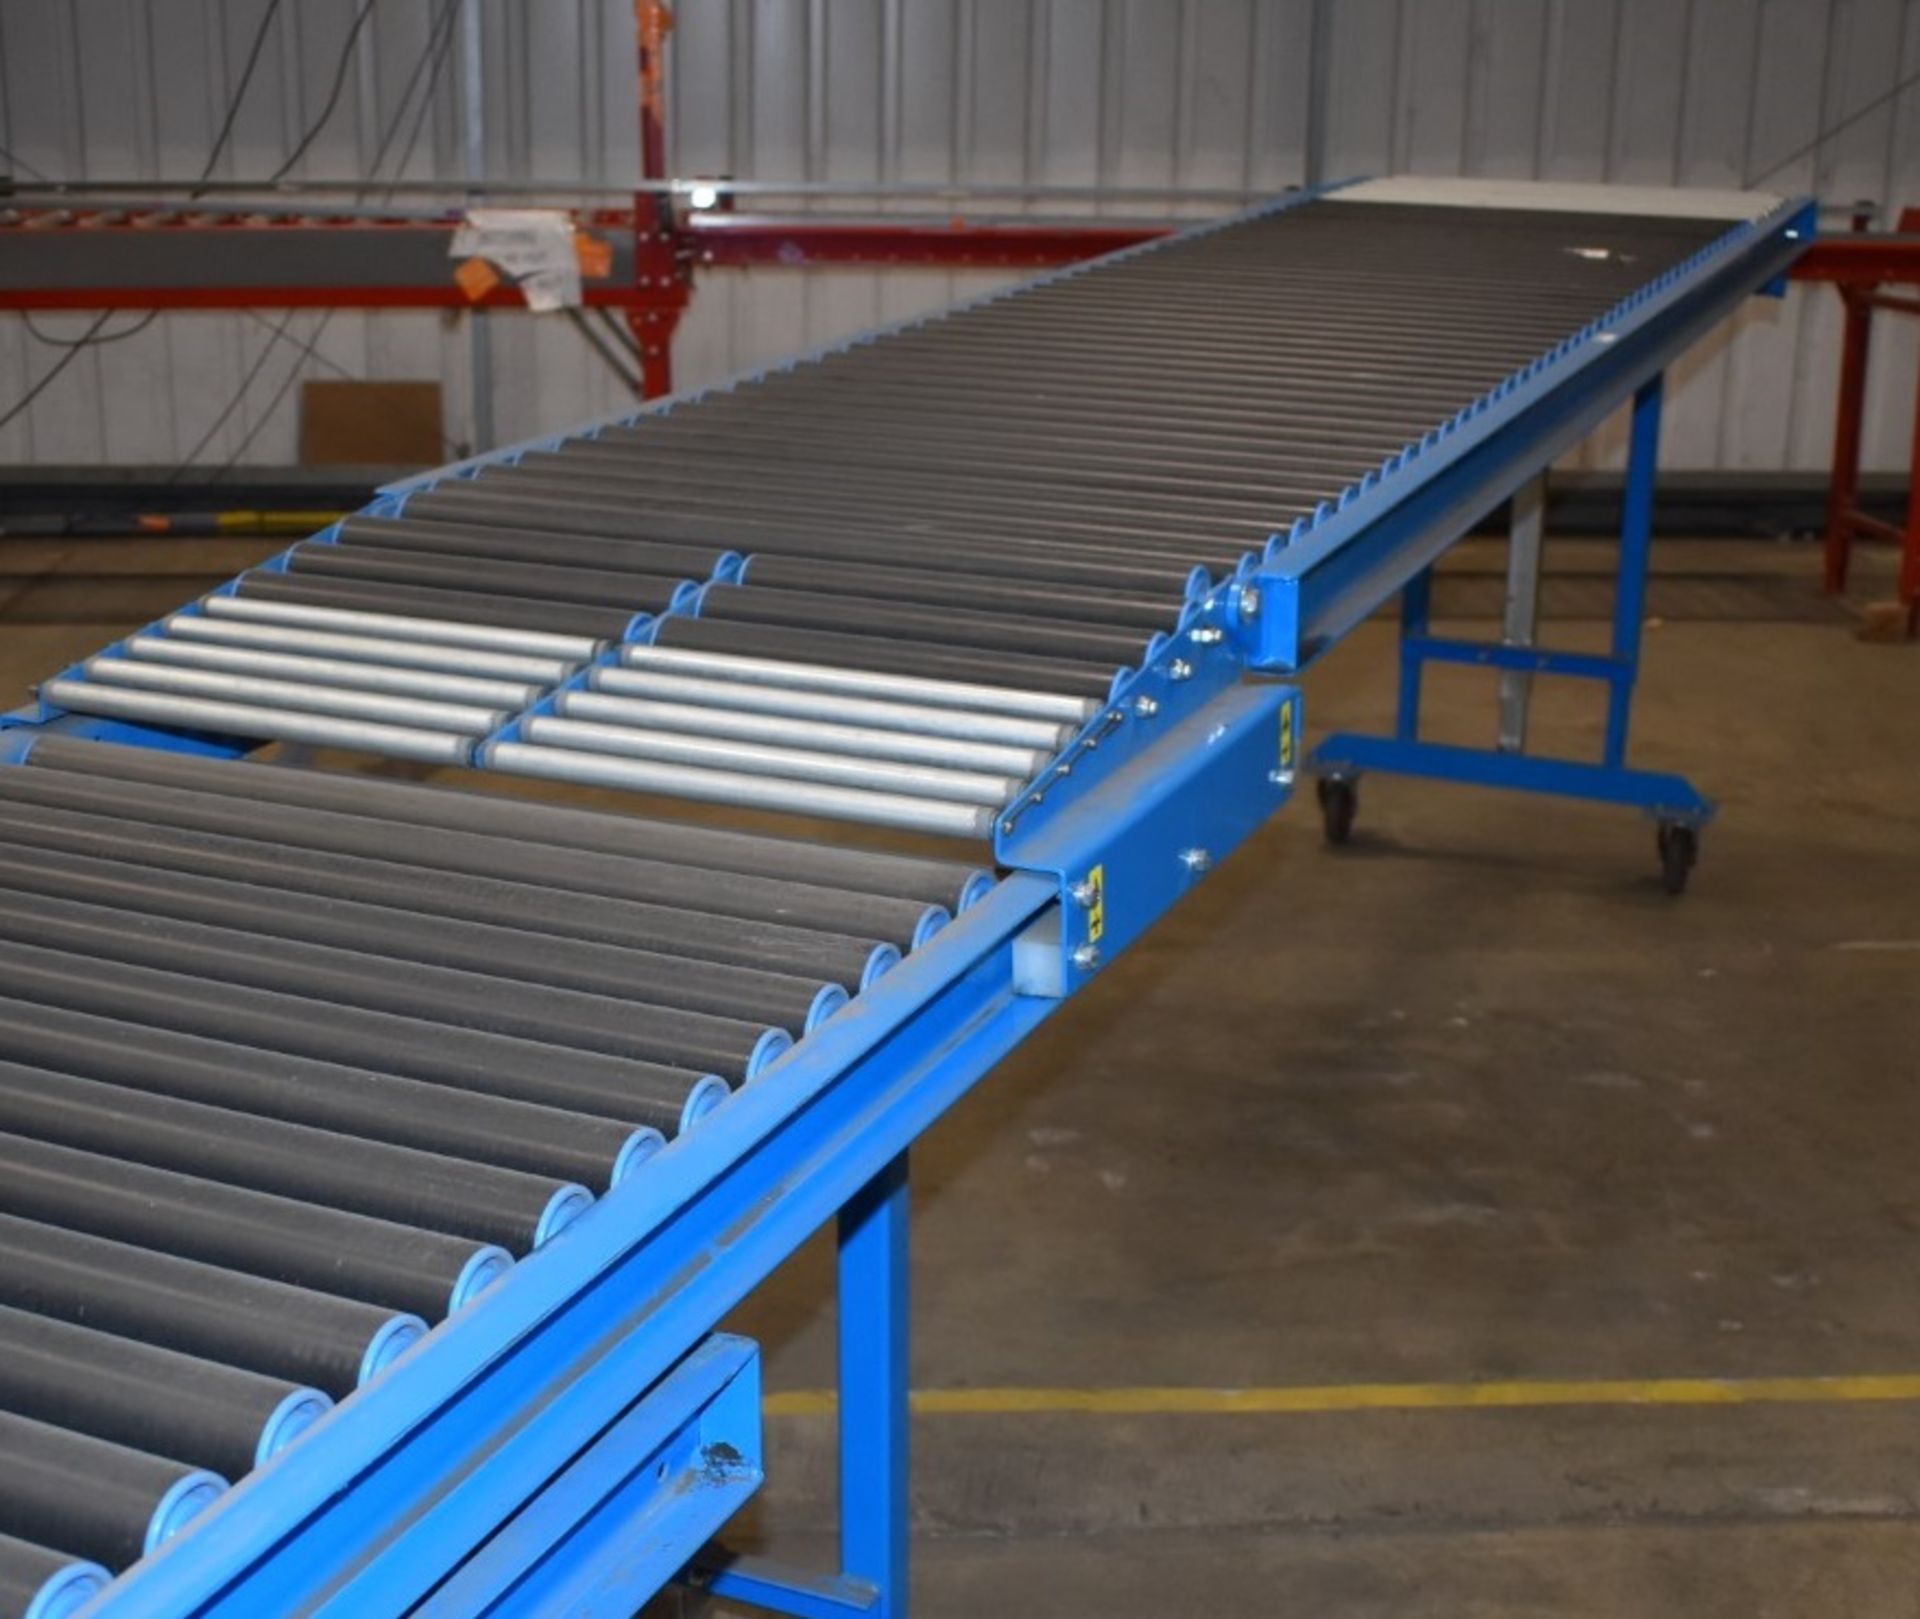 1 x Adjustable Manual Gravity Telescopic Conveyor - For Loading Trucks - Ref FE193A - CL480 - - Image 4 of 9